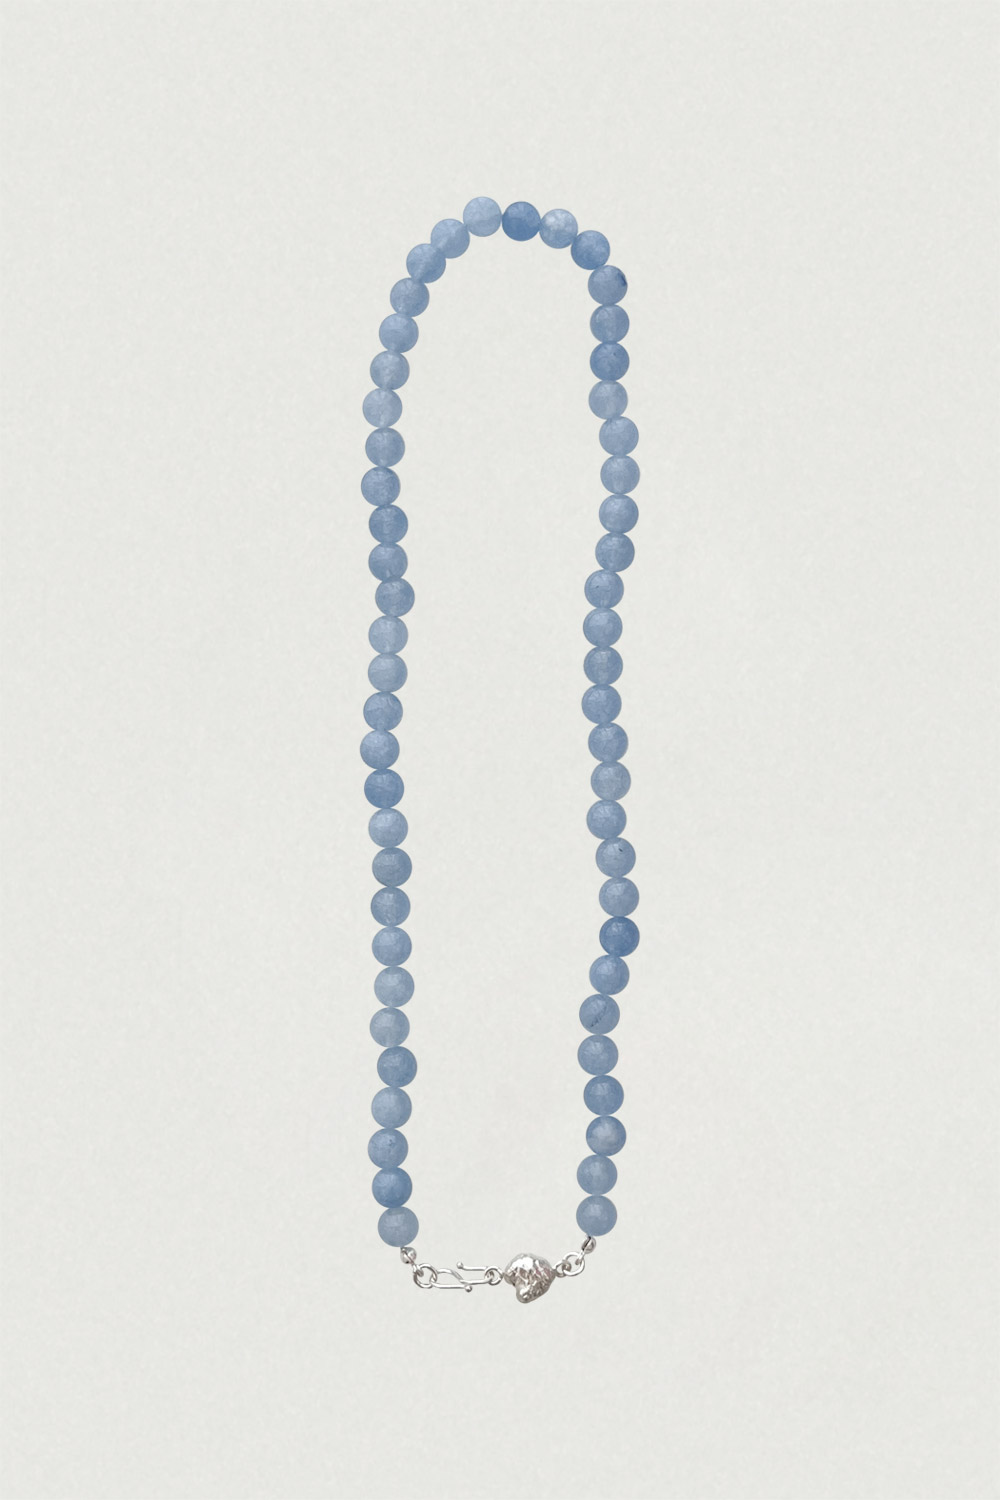 PAERL BLUE NECKLACE